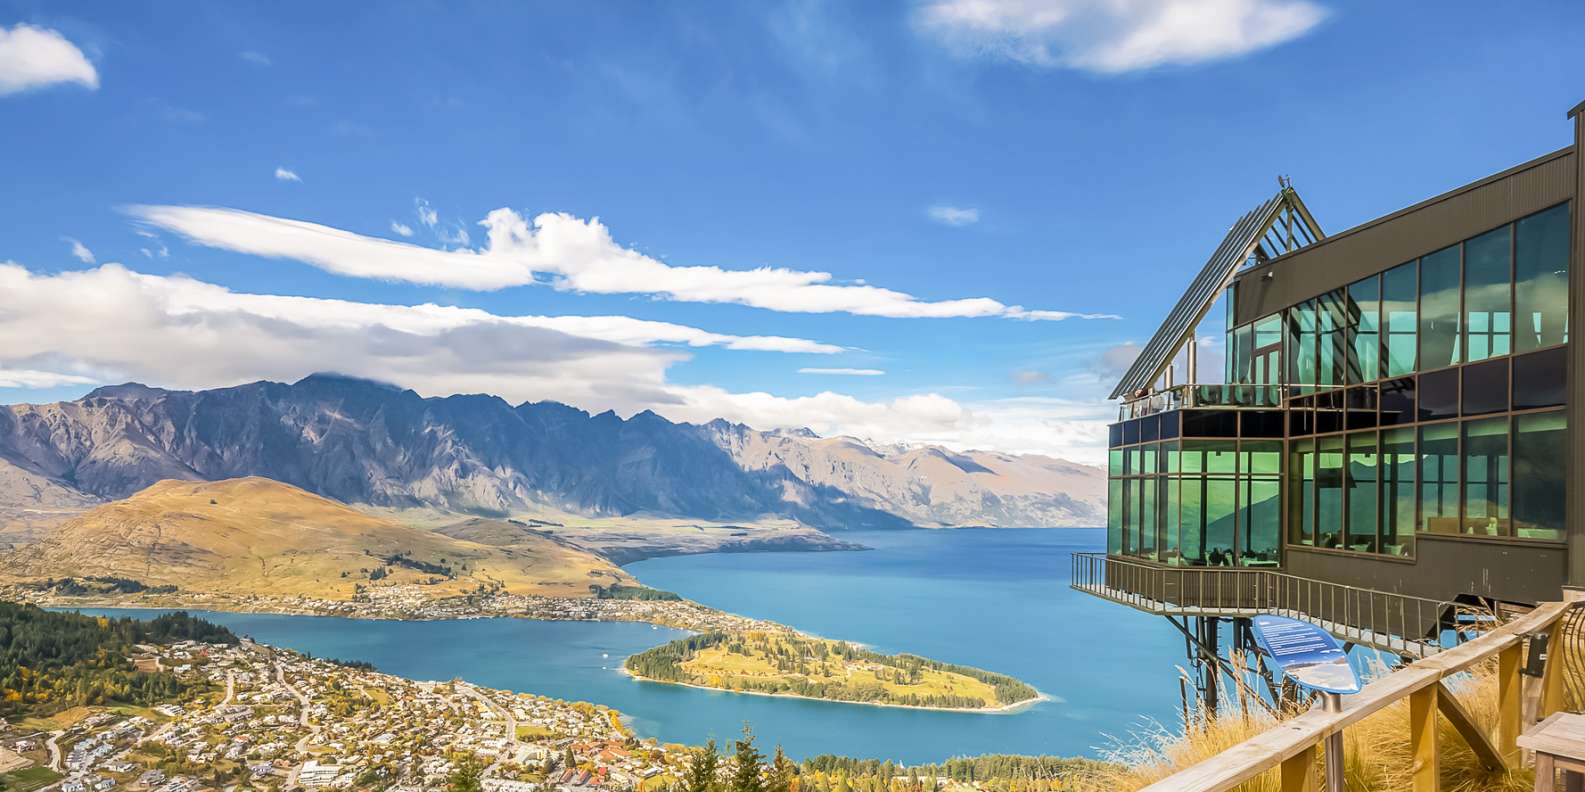 The BEST Queenstown Food & drinks 2023  FREE Cancellation GetYourGuide